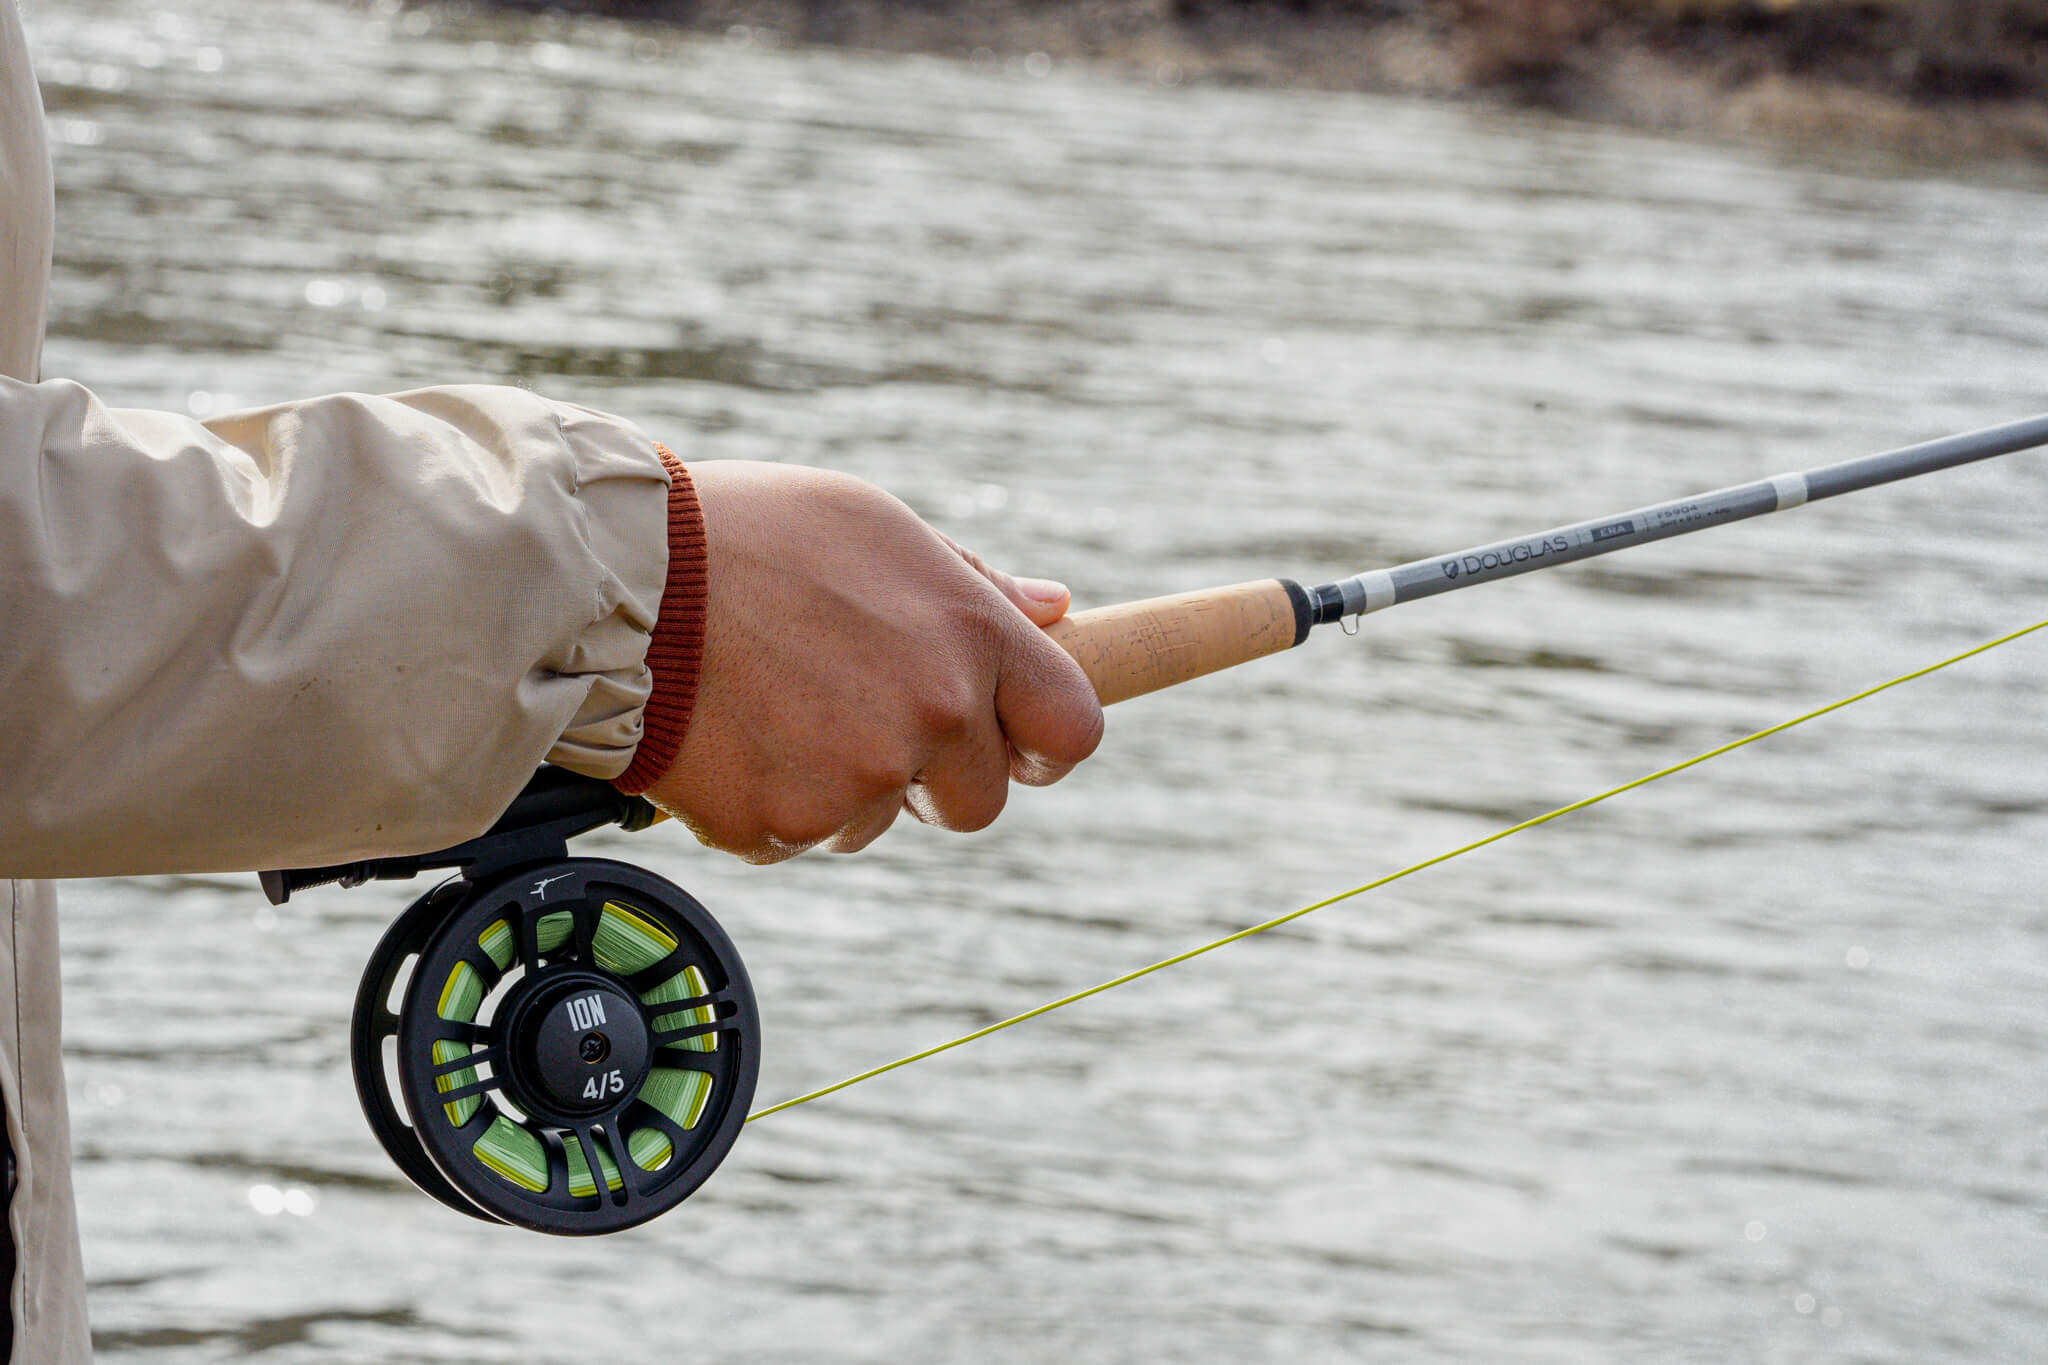 Lamson Liquid Review (Hands-on Tried & Tested) - Into Fly Fishing